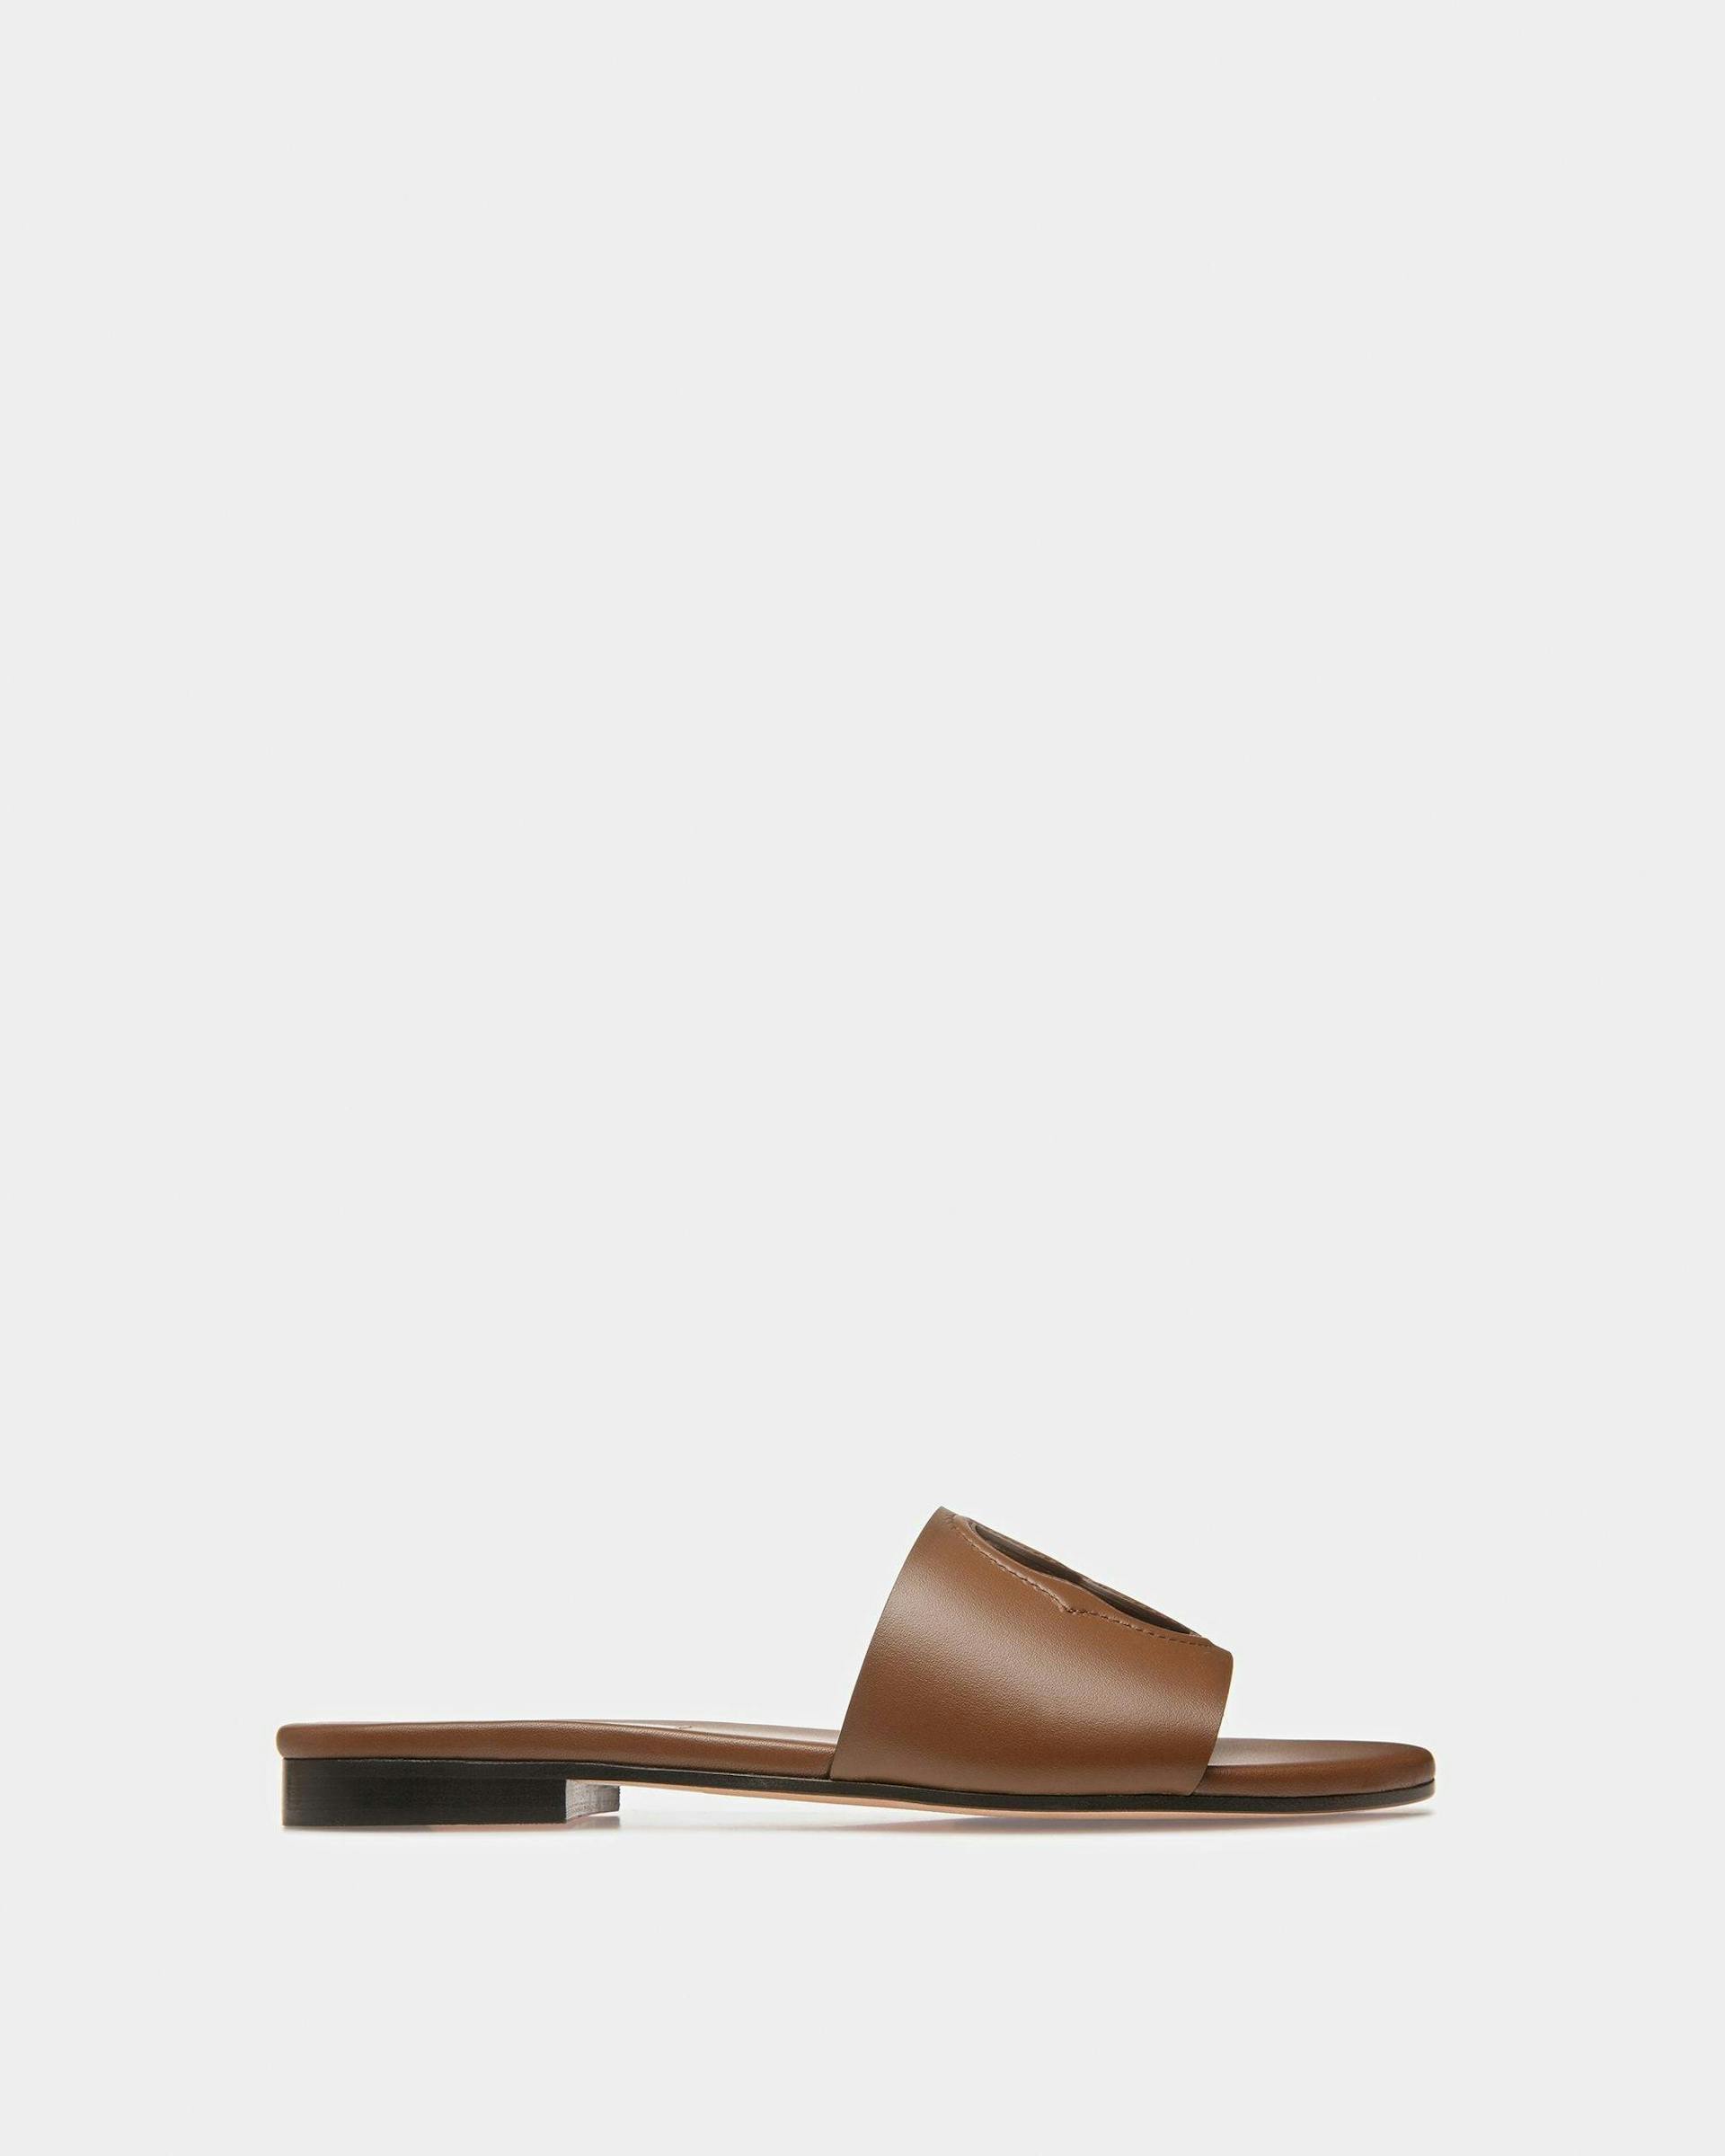 Emblem Slides In Brown Leather - Women's - Bally - 01